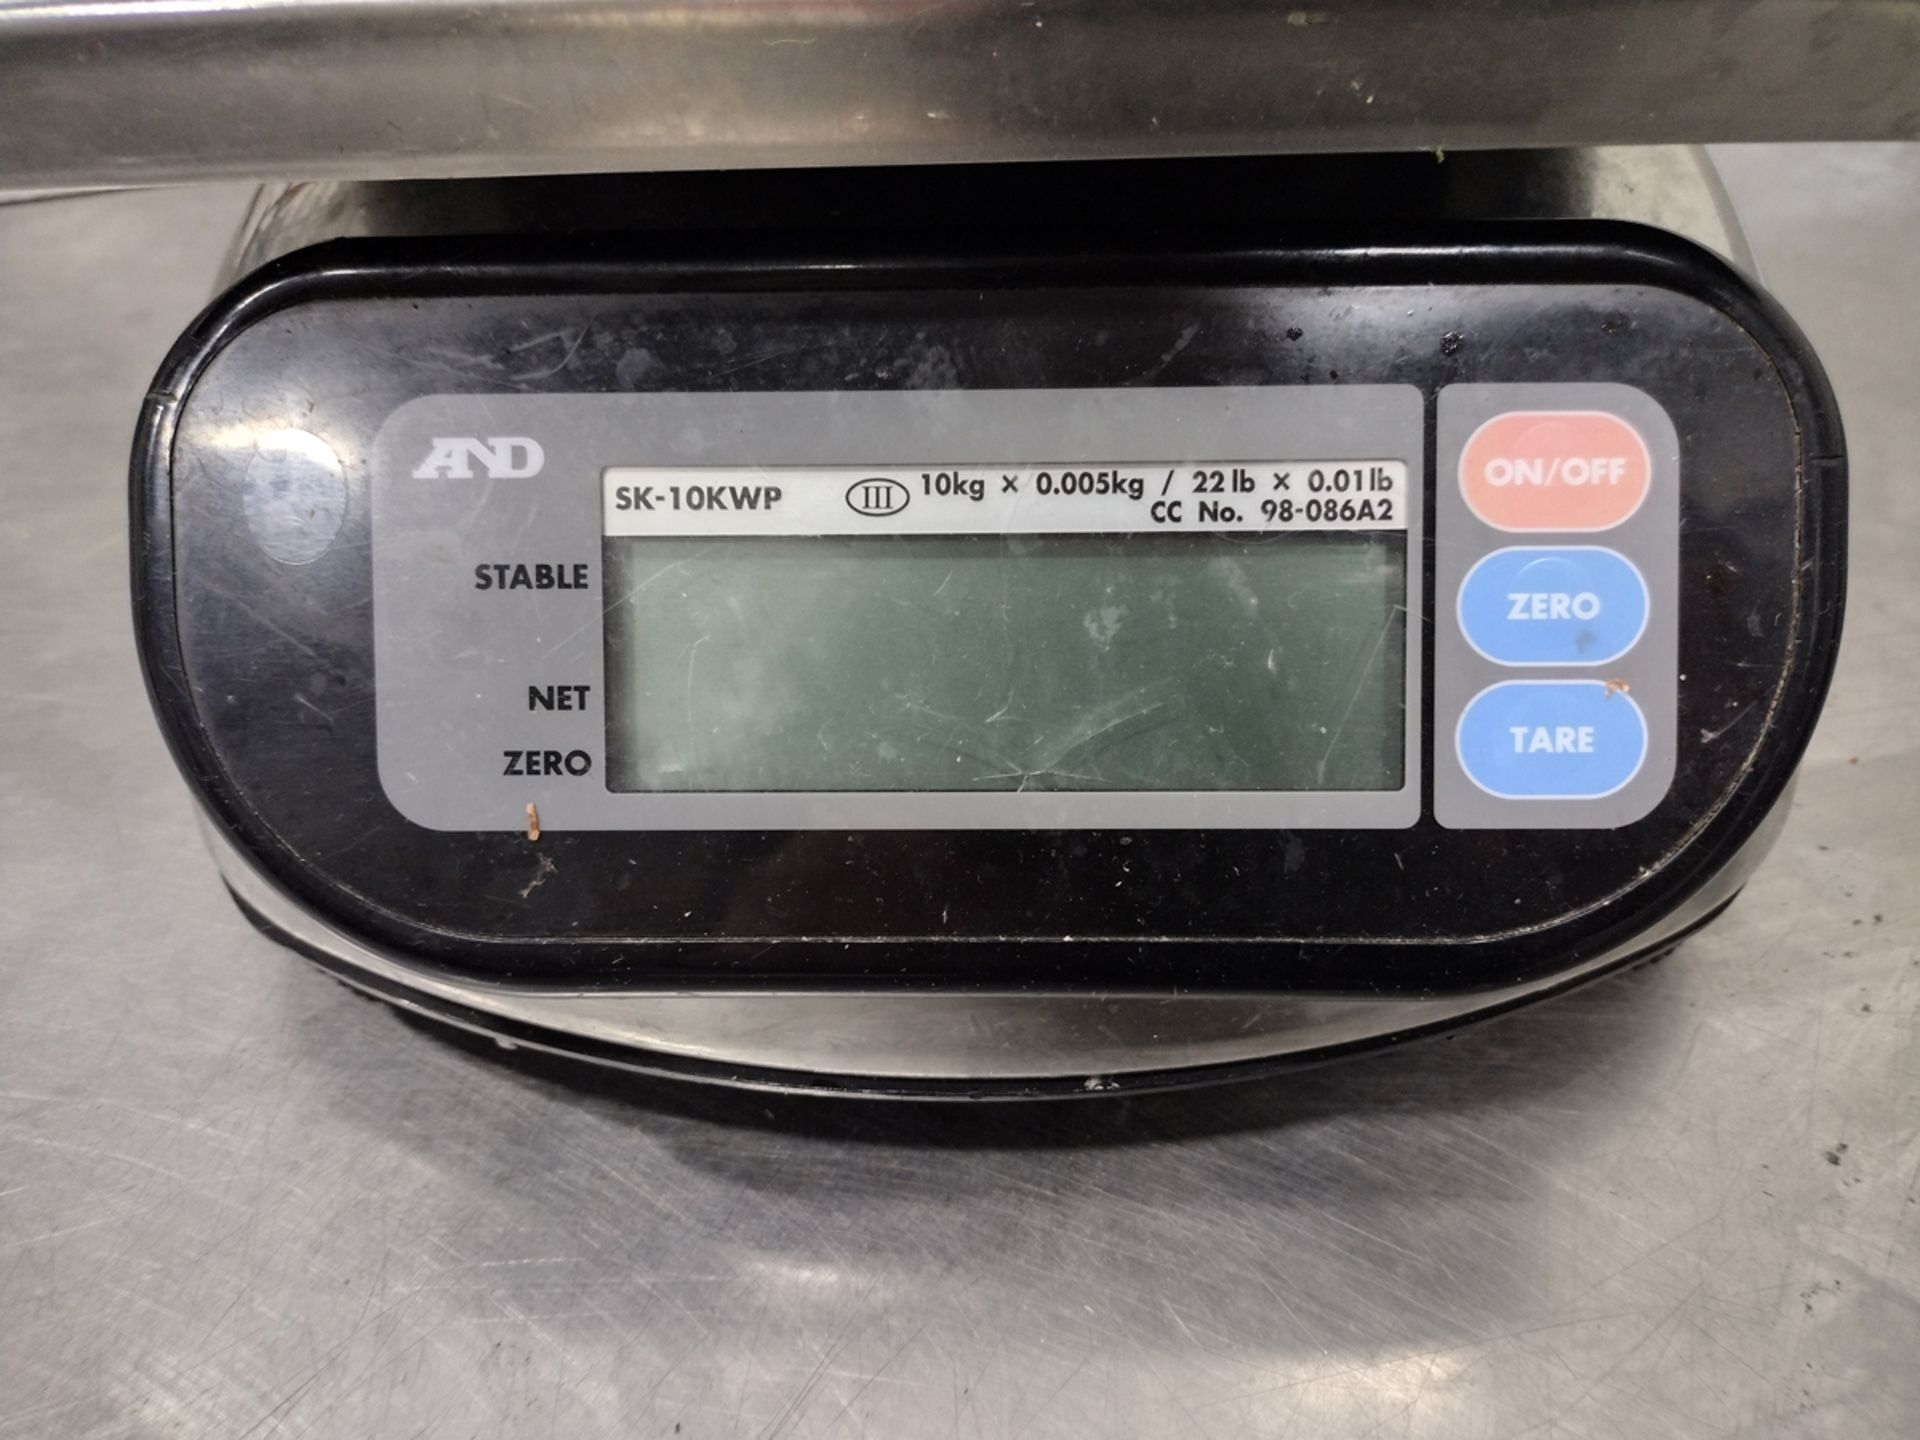 A&D SK-10KWP Digital Stainless Steel Washdown Scale - Image 2 of 3